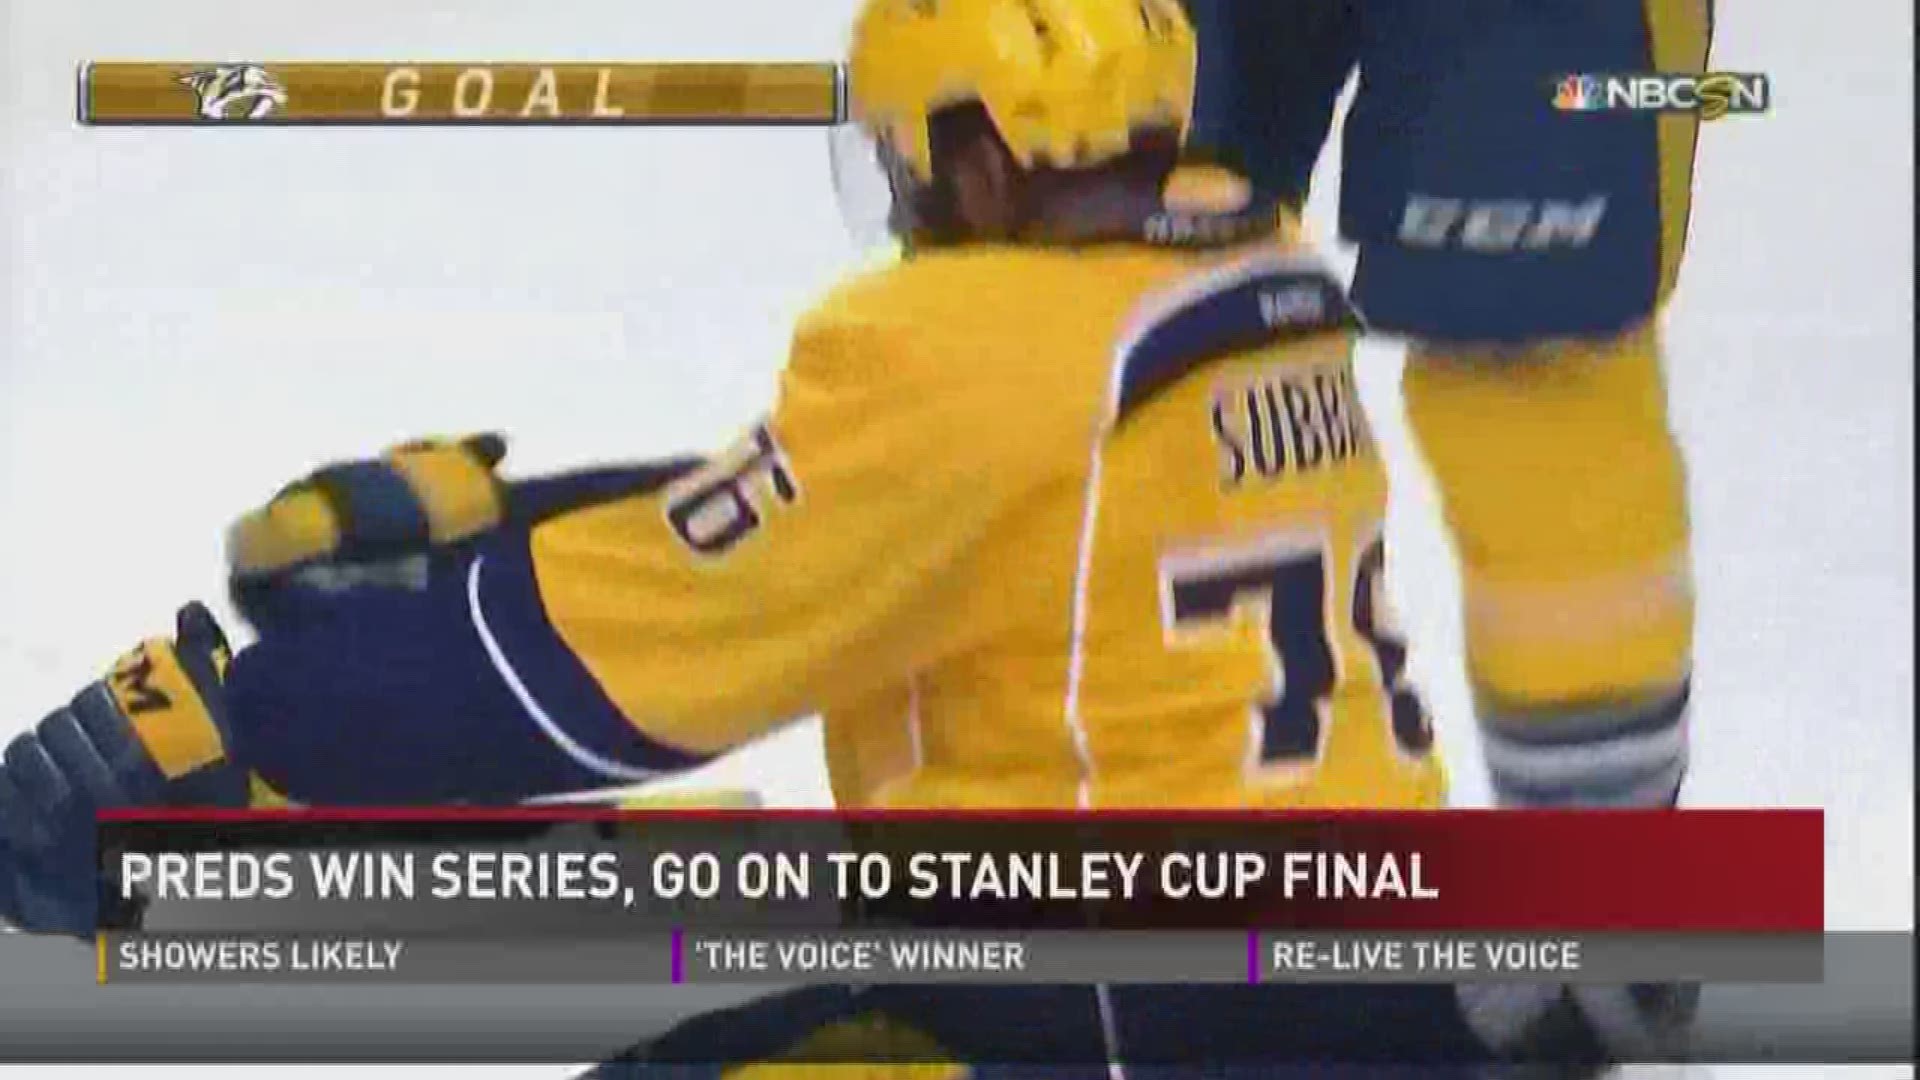 The Nashville Predators defeated the Anaheim Ducks to make it to the team's first Stanley Cup.